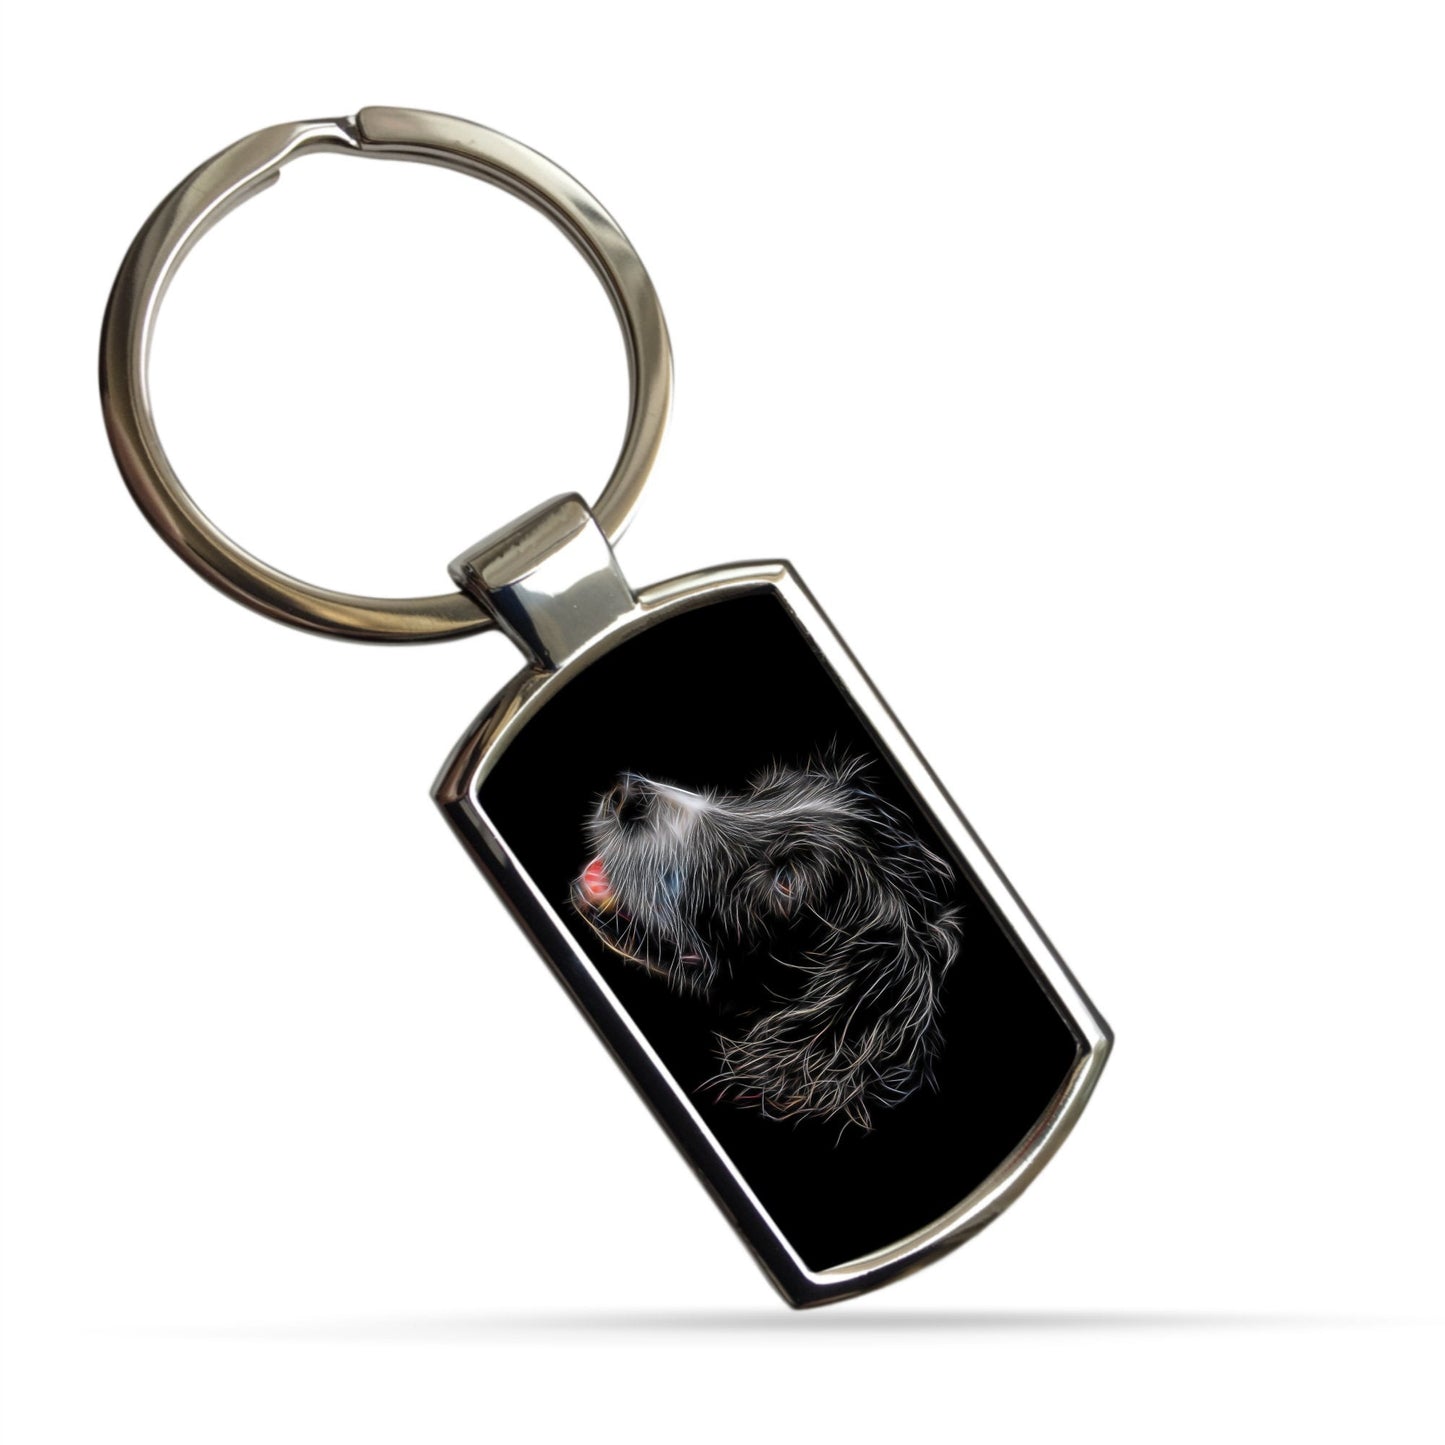 Sprollie Dog Keychain / Keyring / Bagtag with Stunning Fractal Art Design. A Perfect Gift for Dog Lover.